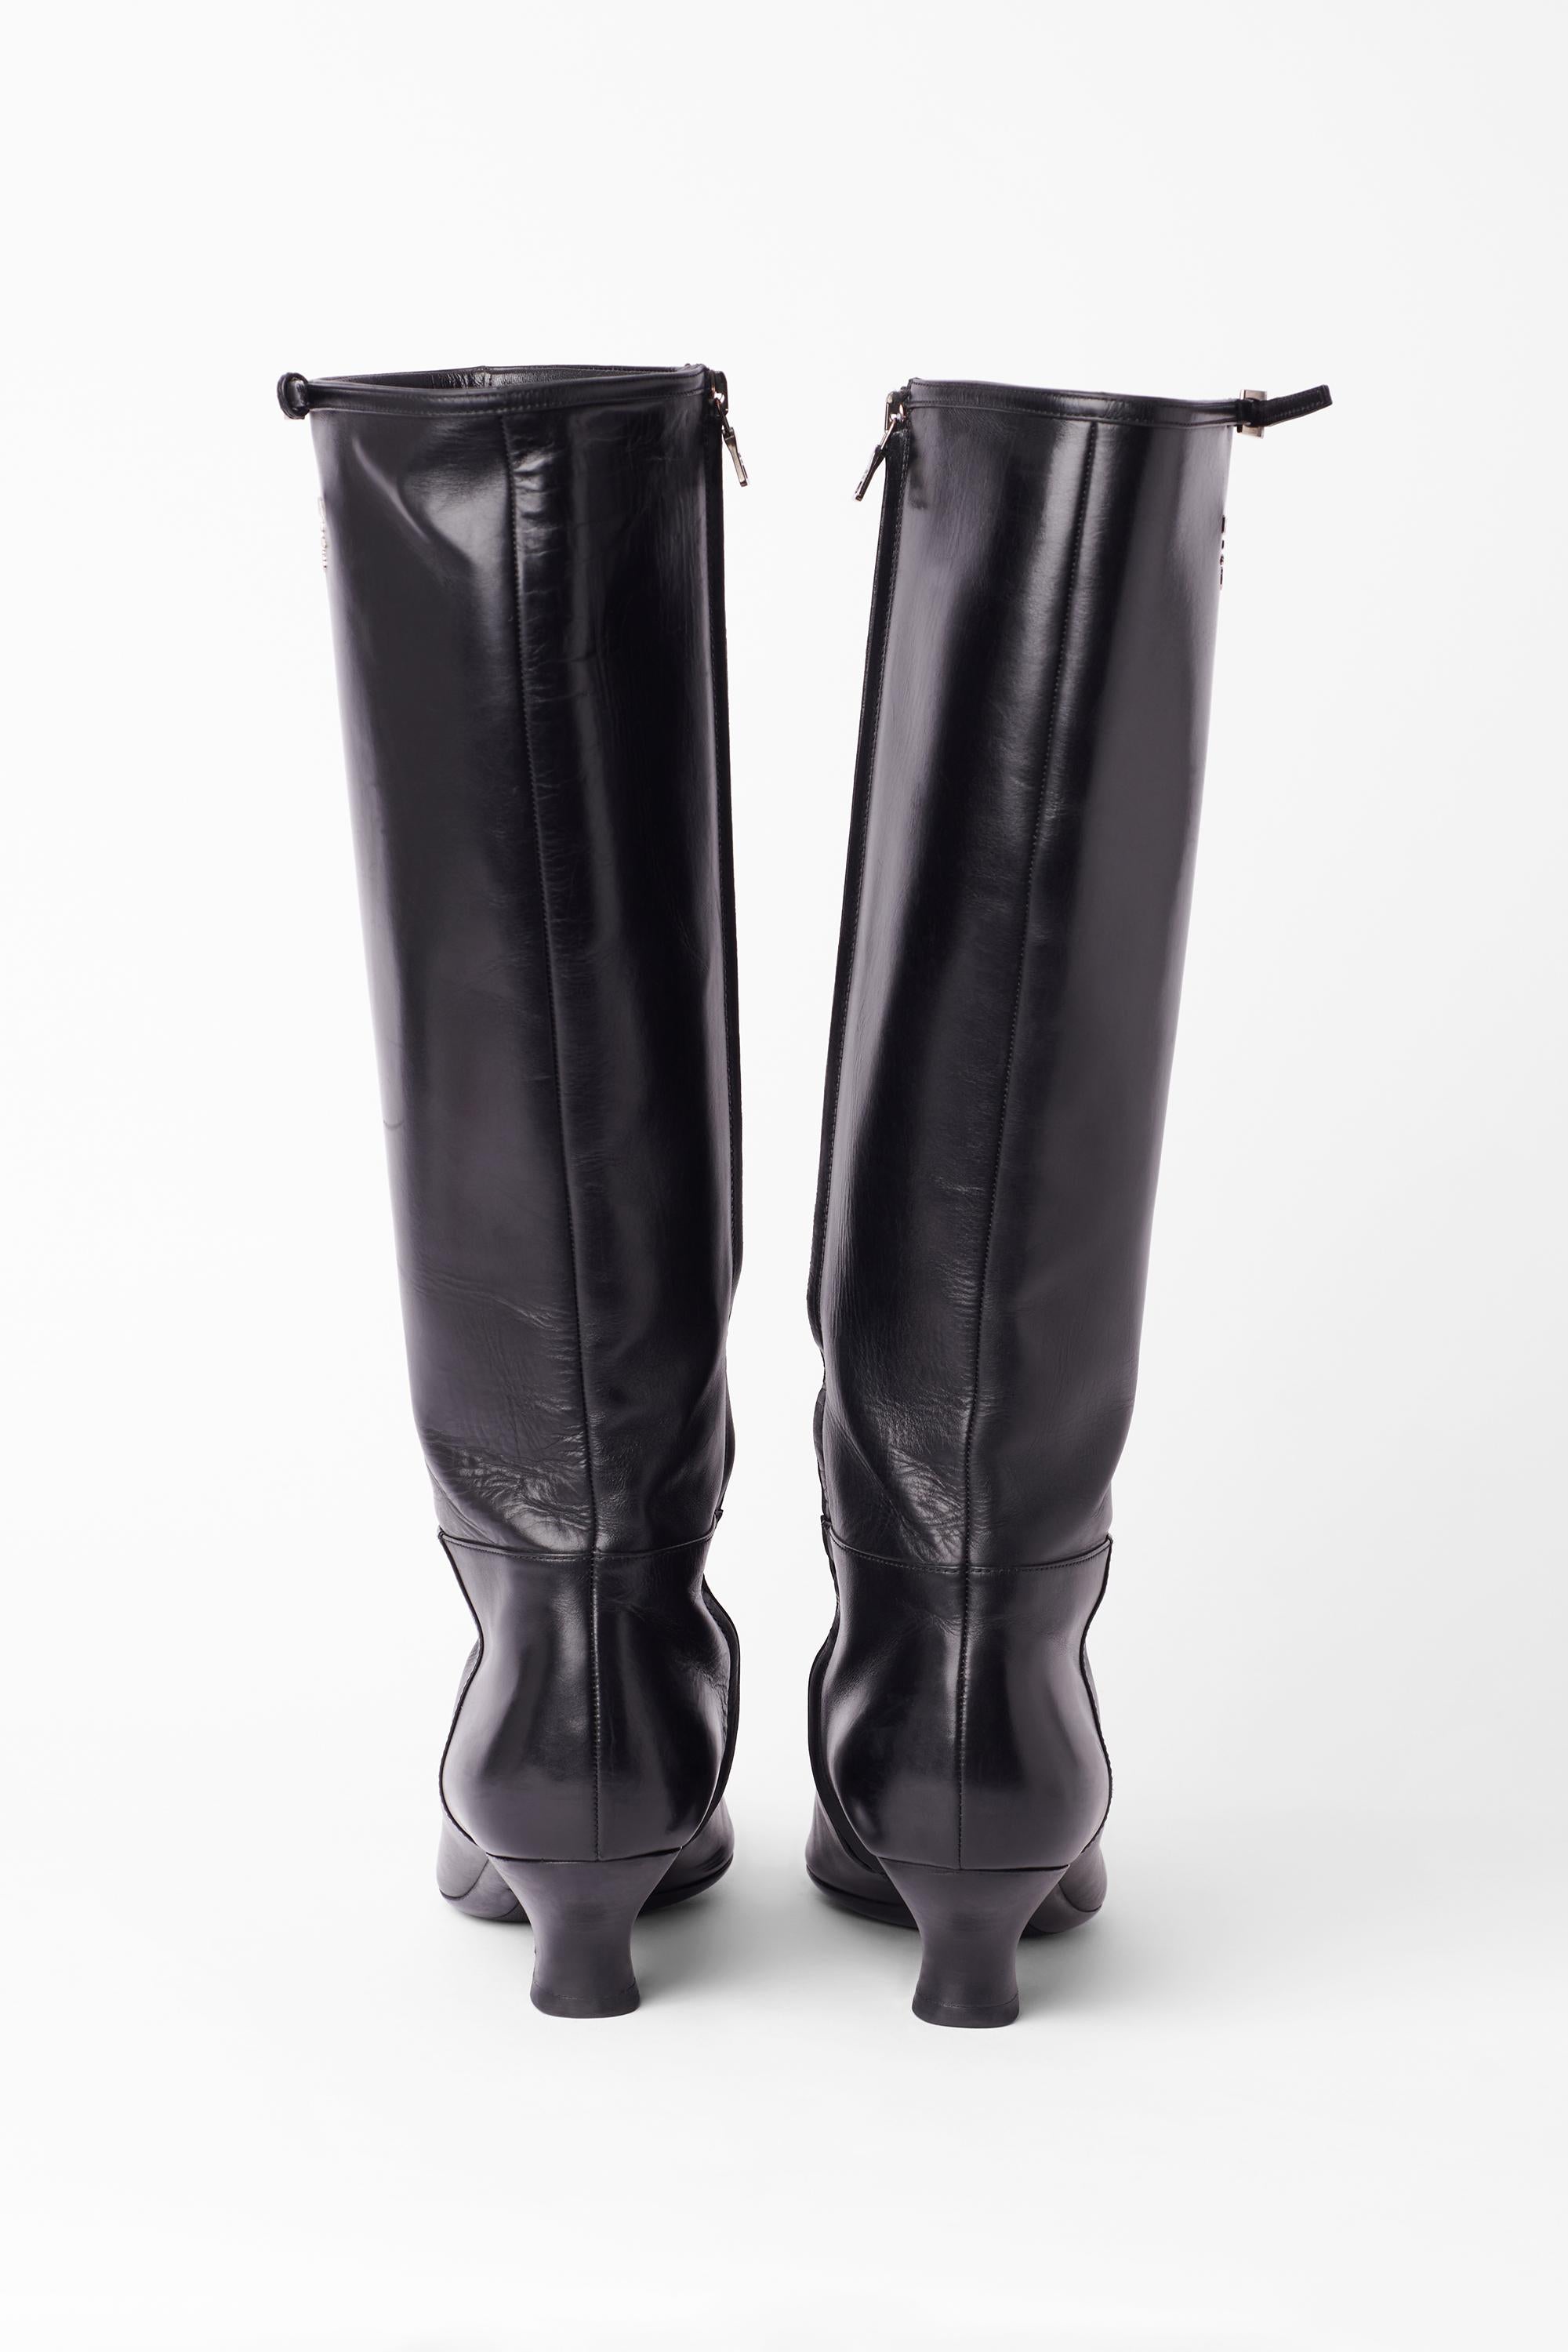 Vintage 2000’s Black Leather Kitten Heels Boots In Excellent Condition For Sale In London, GB